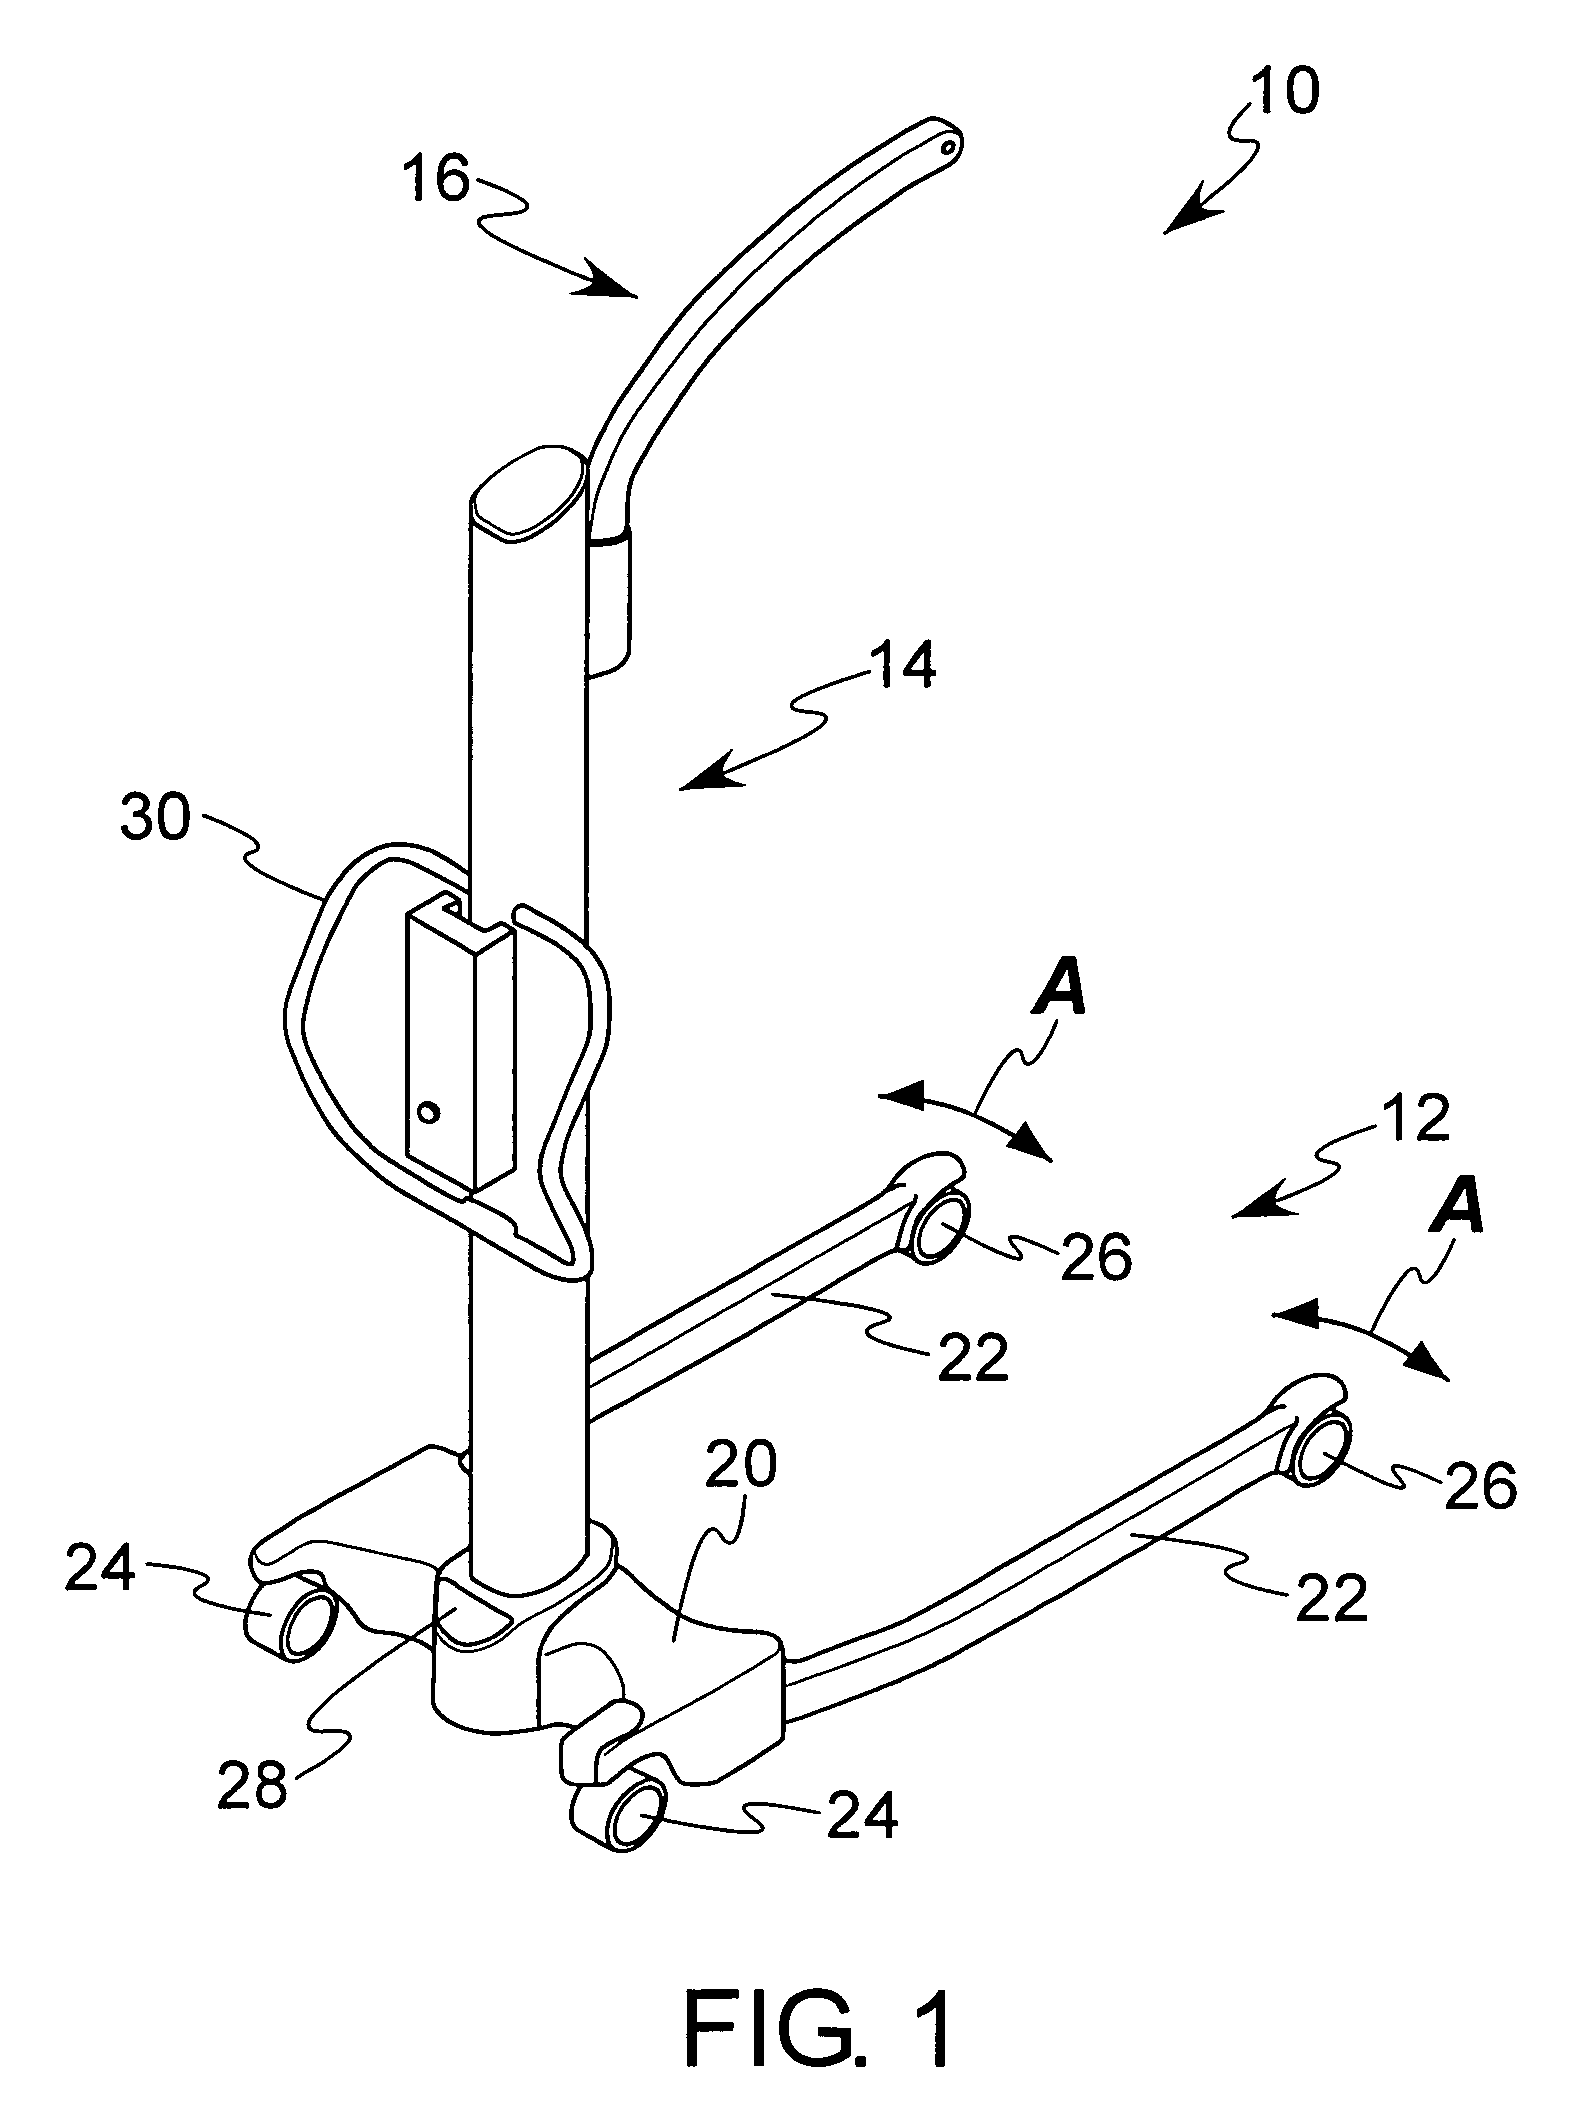 Load sensing safety device for vertical lift